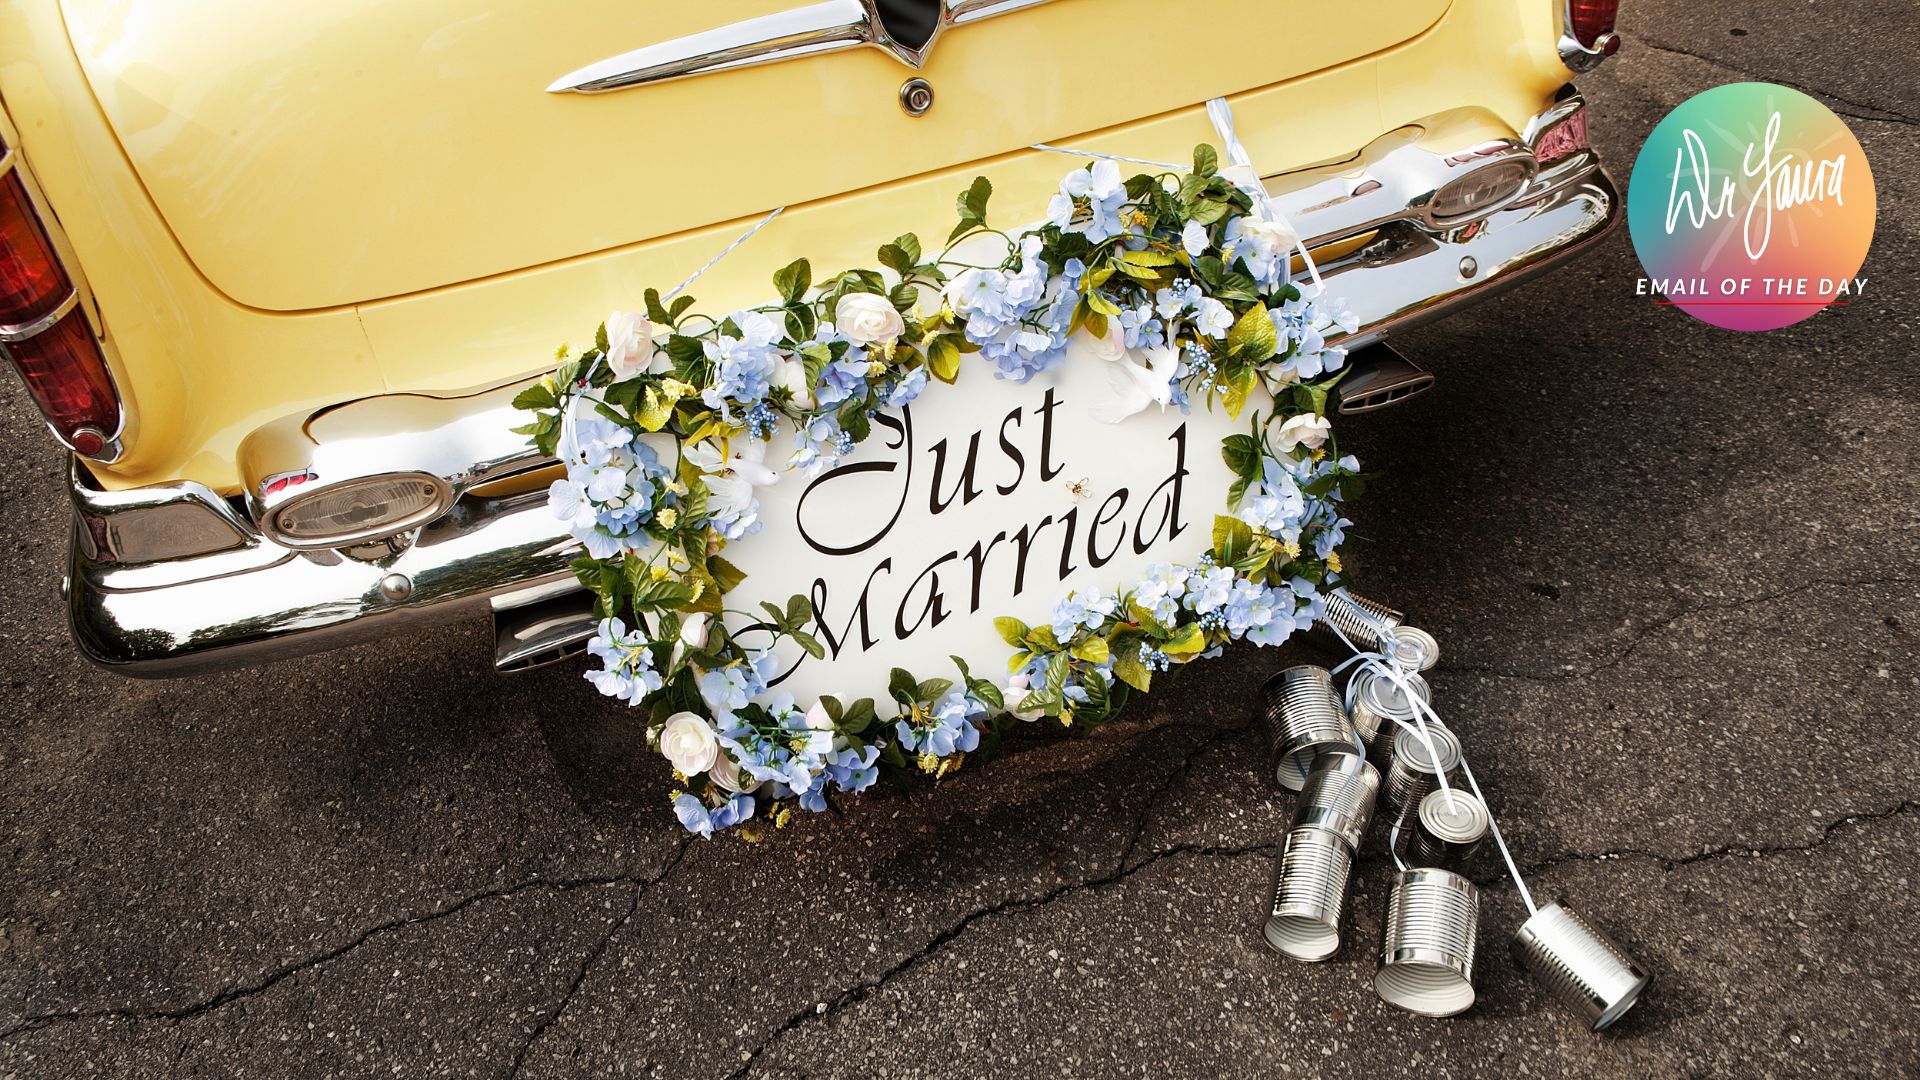 Image of yellow car with license plate reading "Just Married" and decorated with blue flowers and several tin cans tied to it